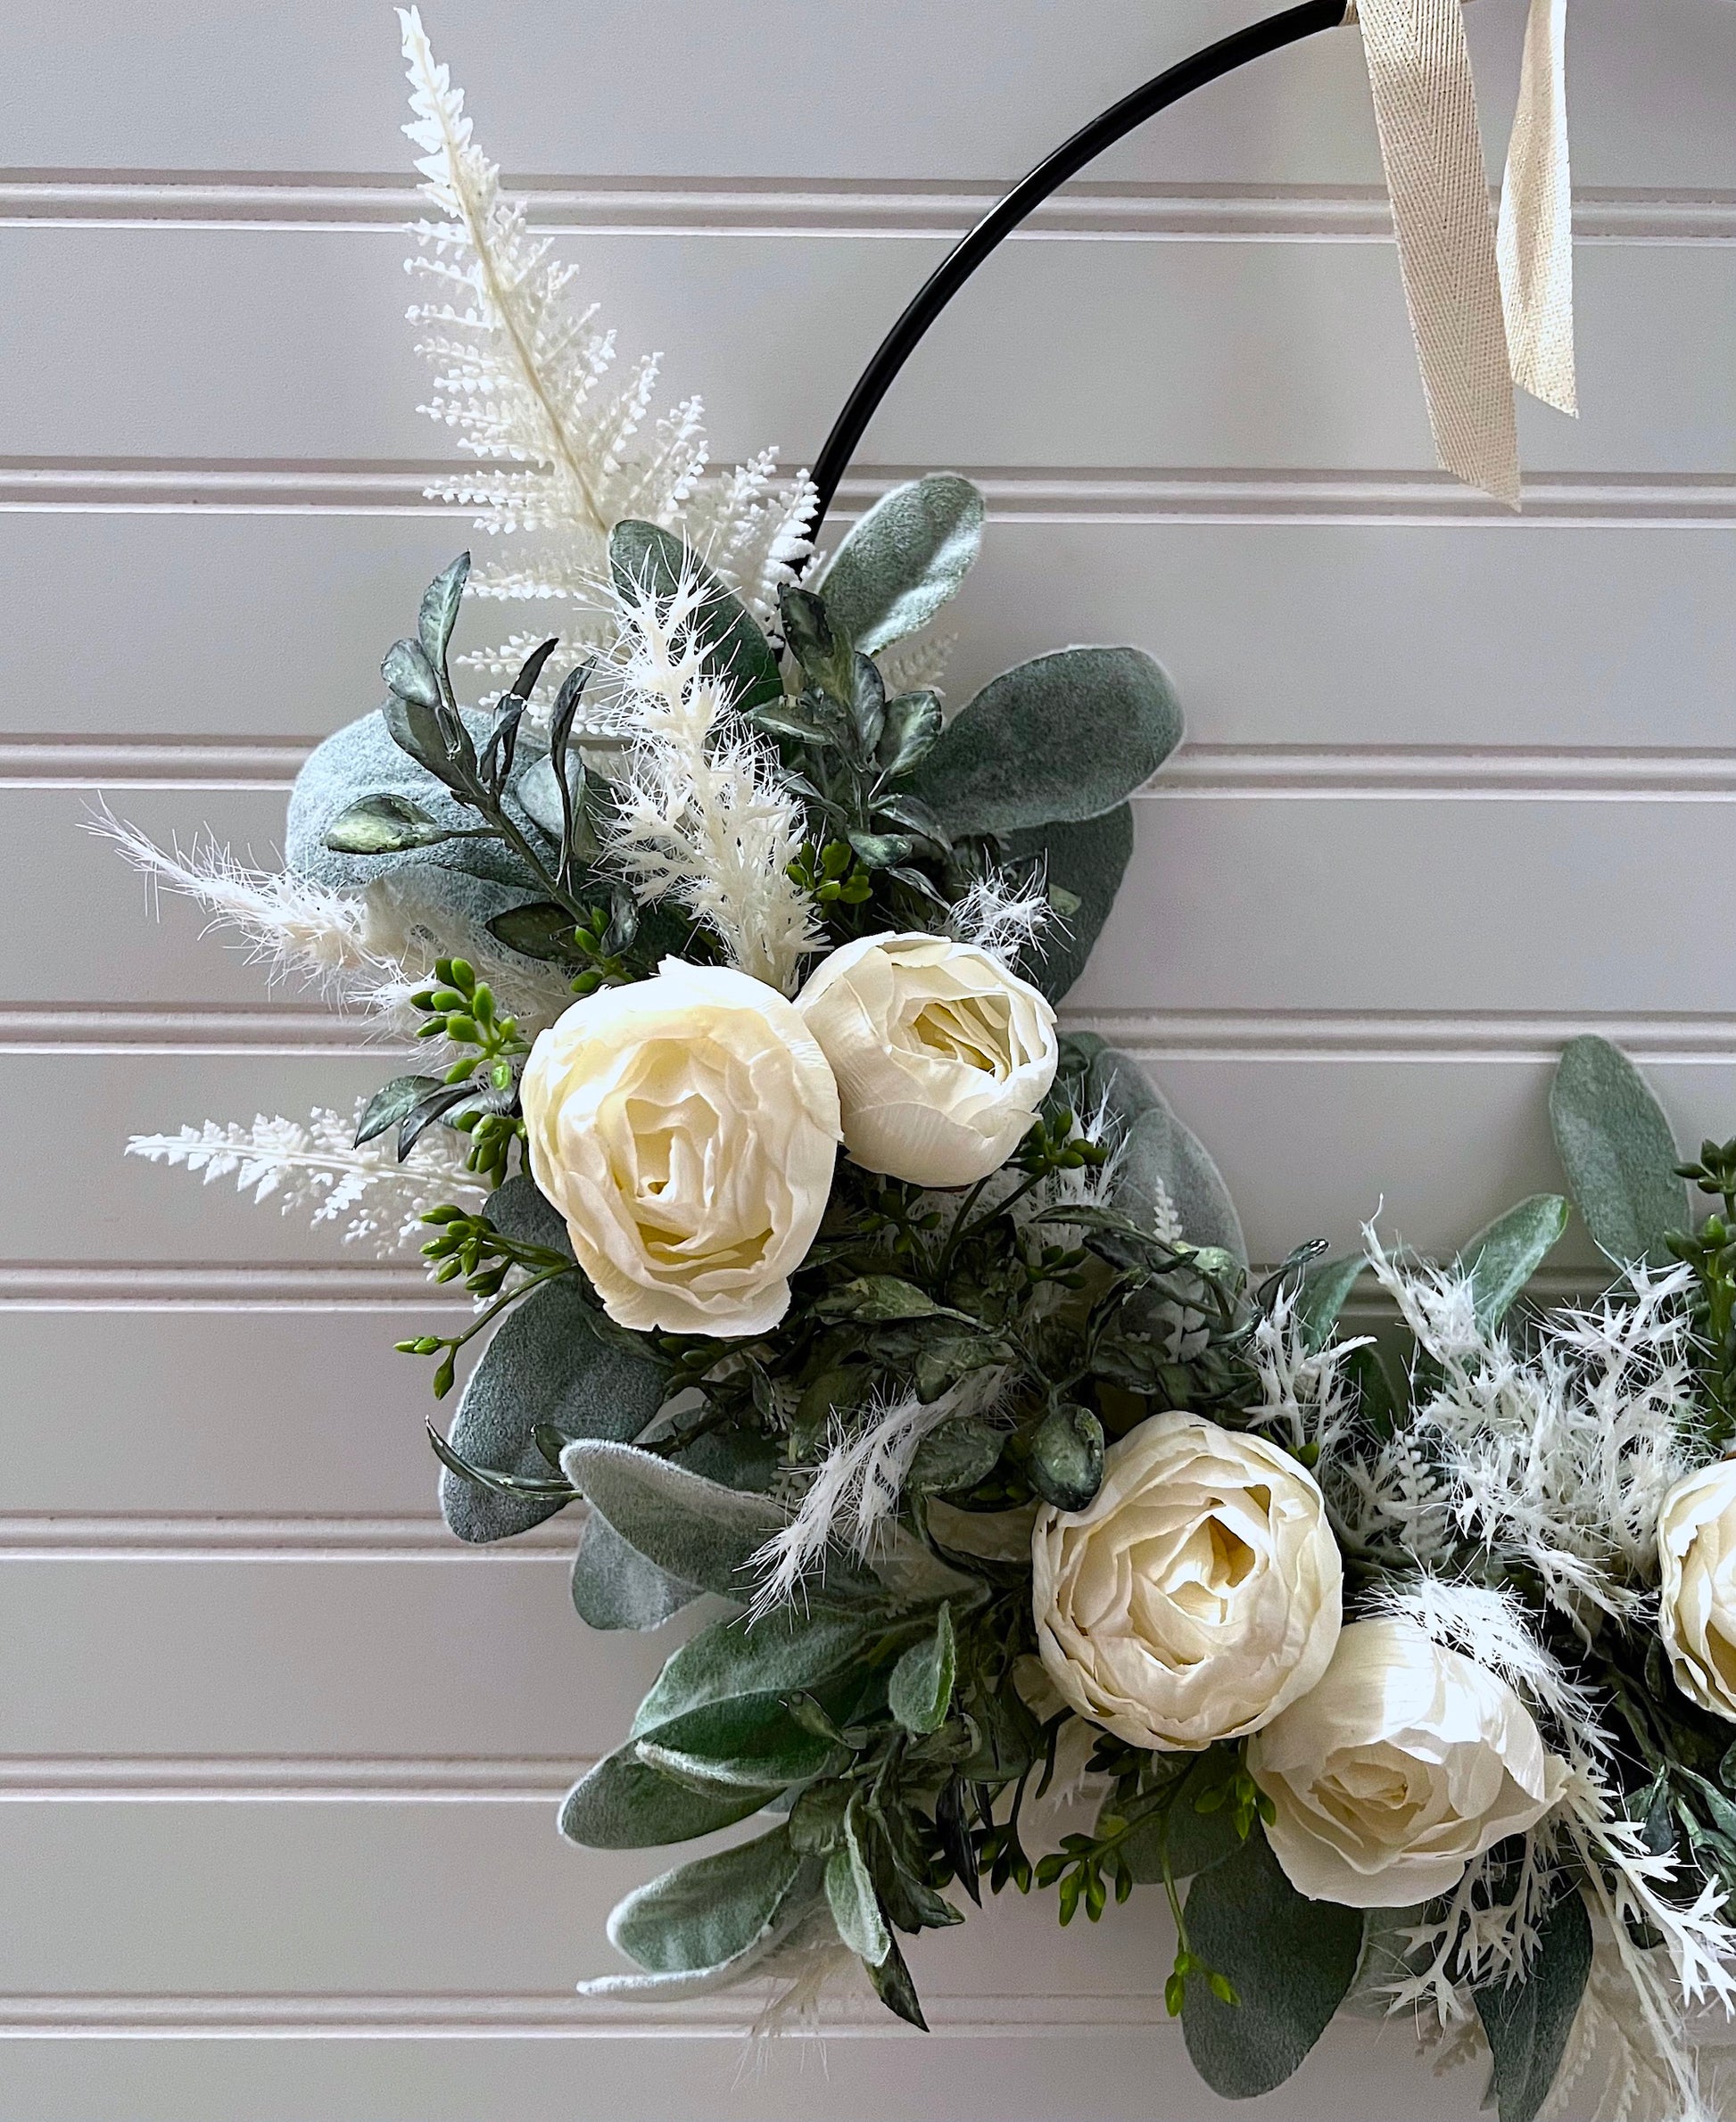 Magnified  view of a black metal hoop wreath hanging from an ivory ribbon; decorated with lambs ear, contrasting green foliage, pieces of white fern, and small ivory peony flowers